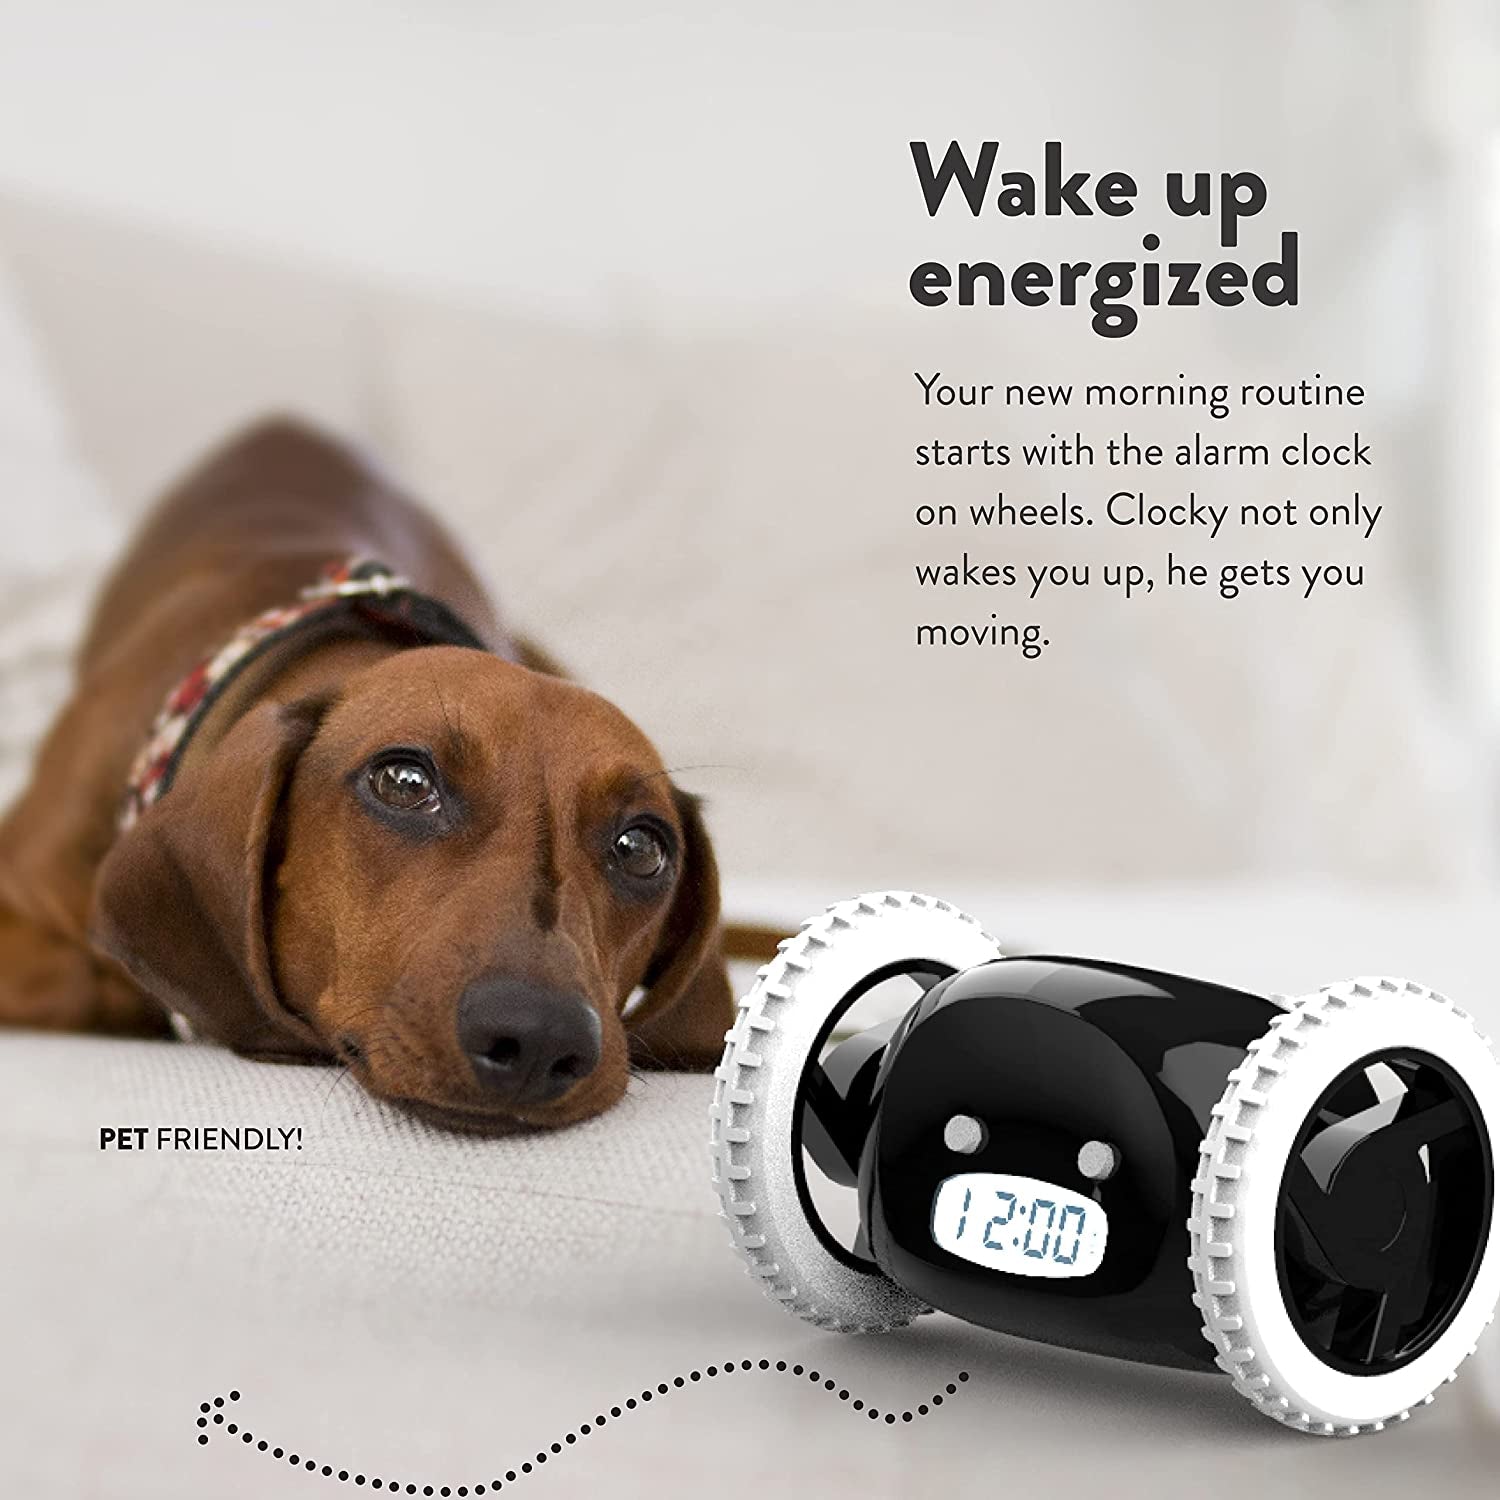 Clocky - The Runaway Alarm Clock That Will Get You Out of Bed